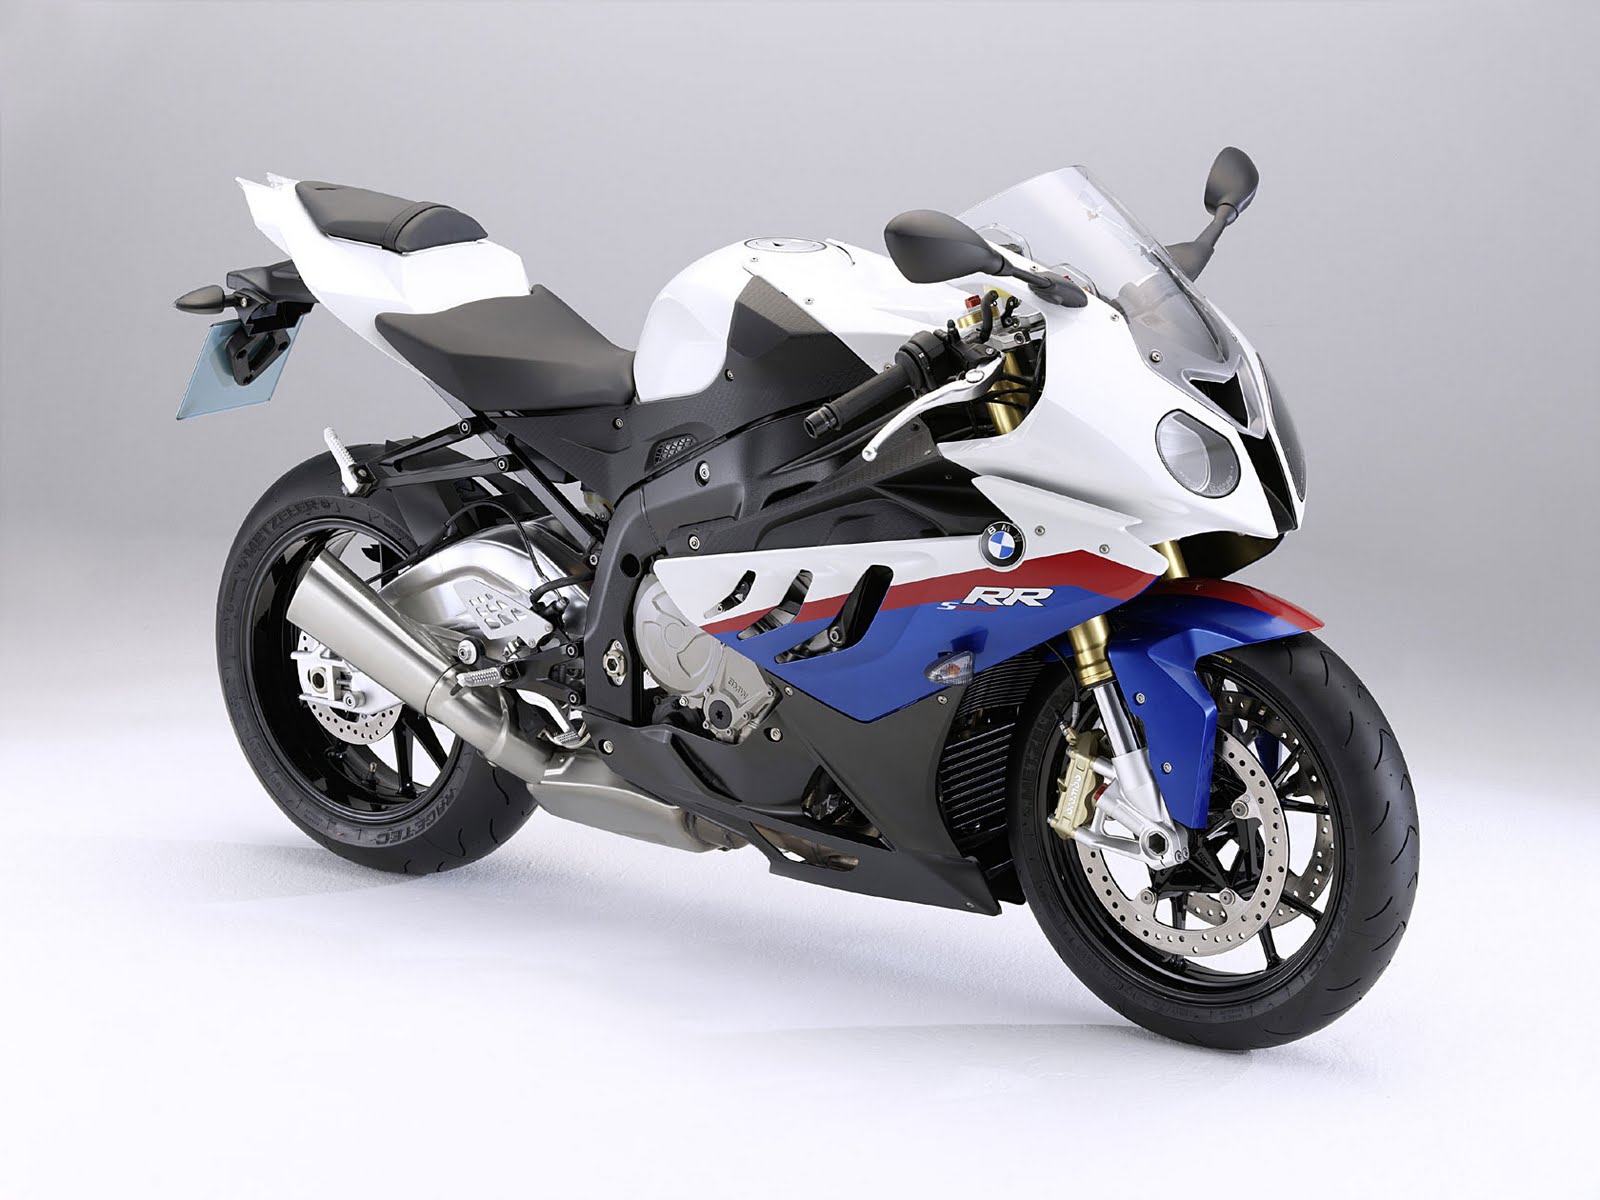 A BMW S1000RR motorcycle from 2009